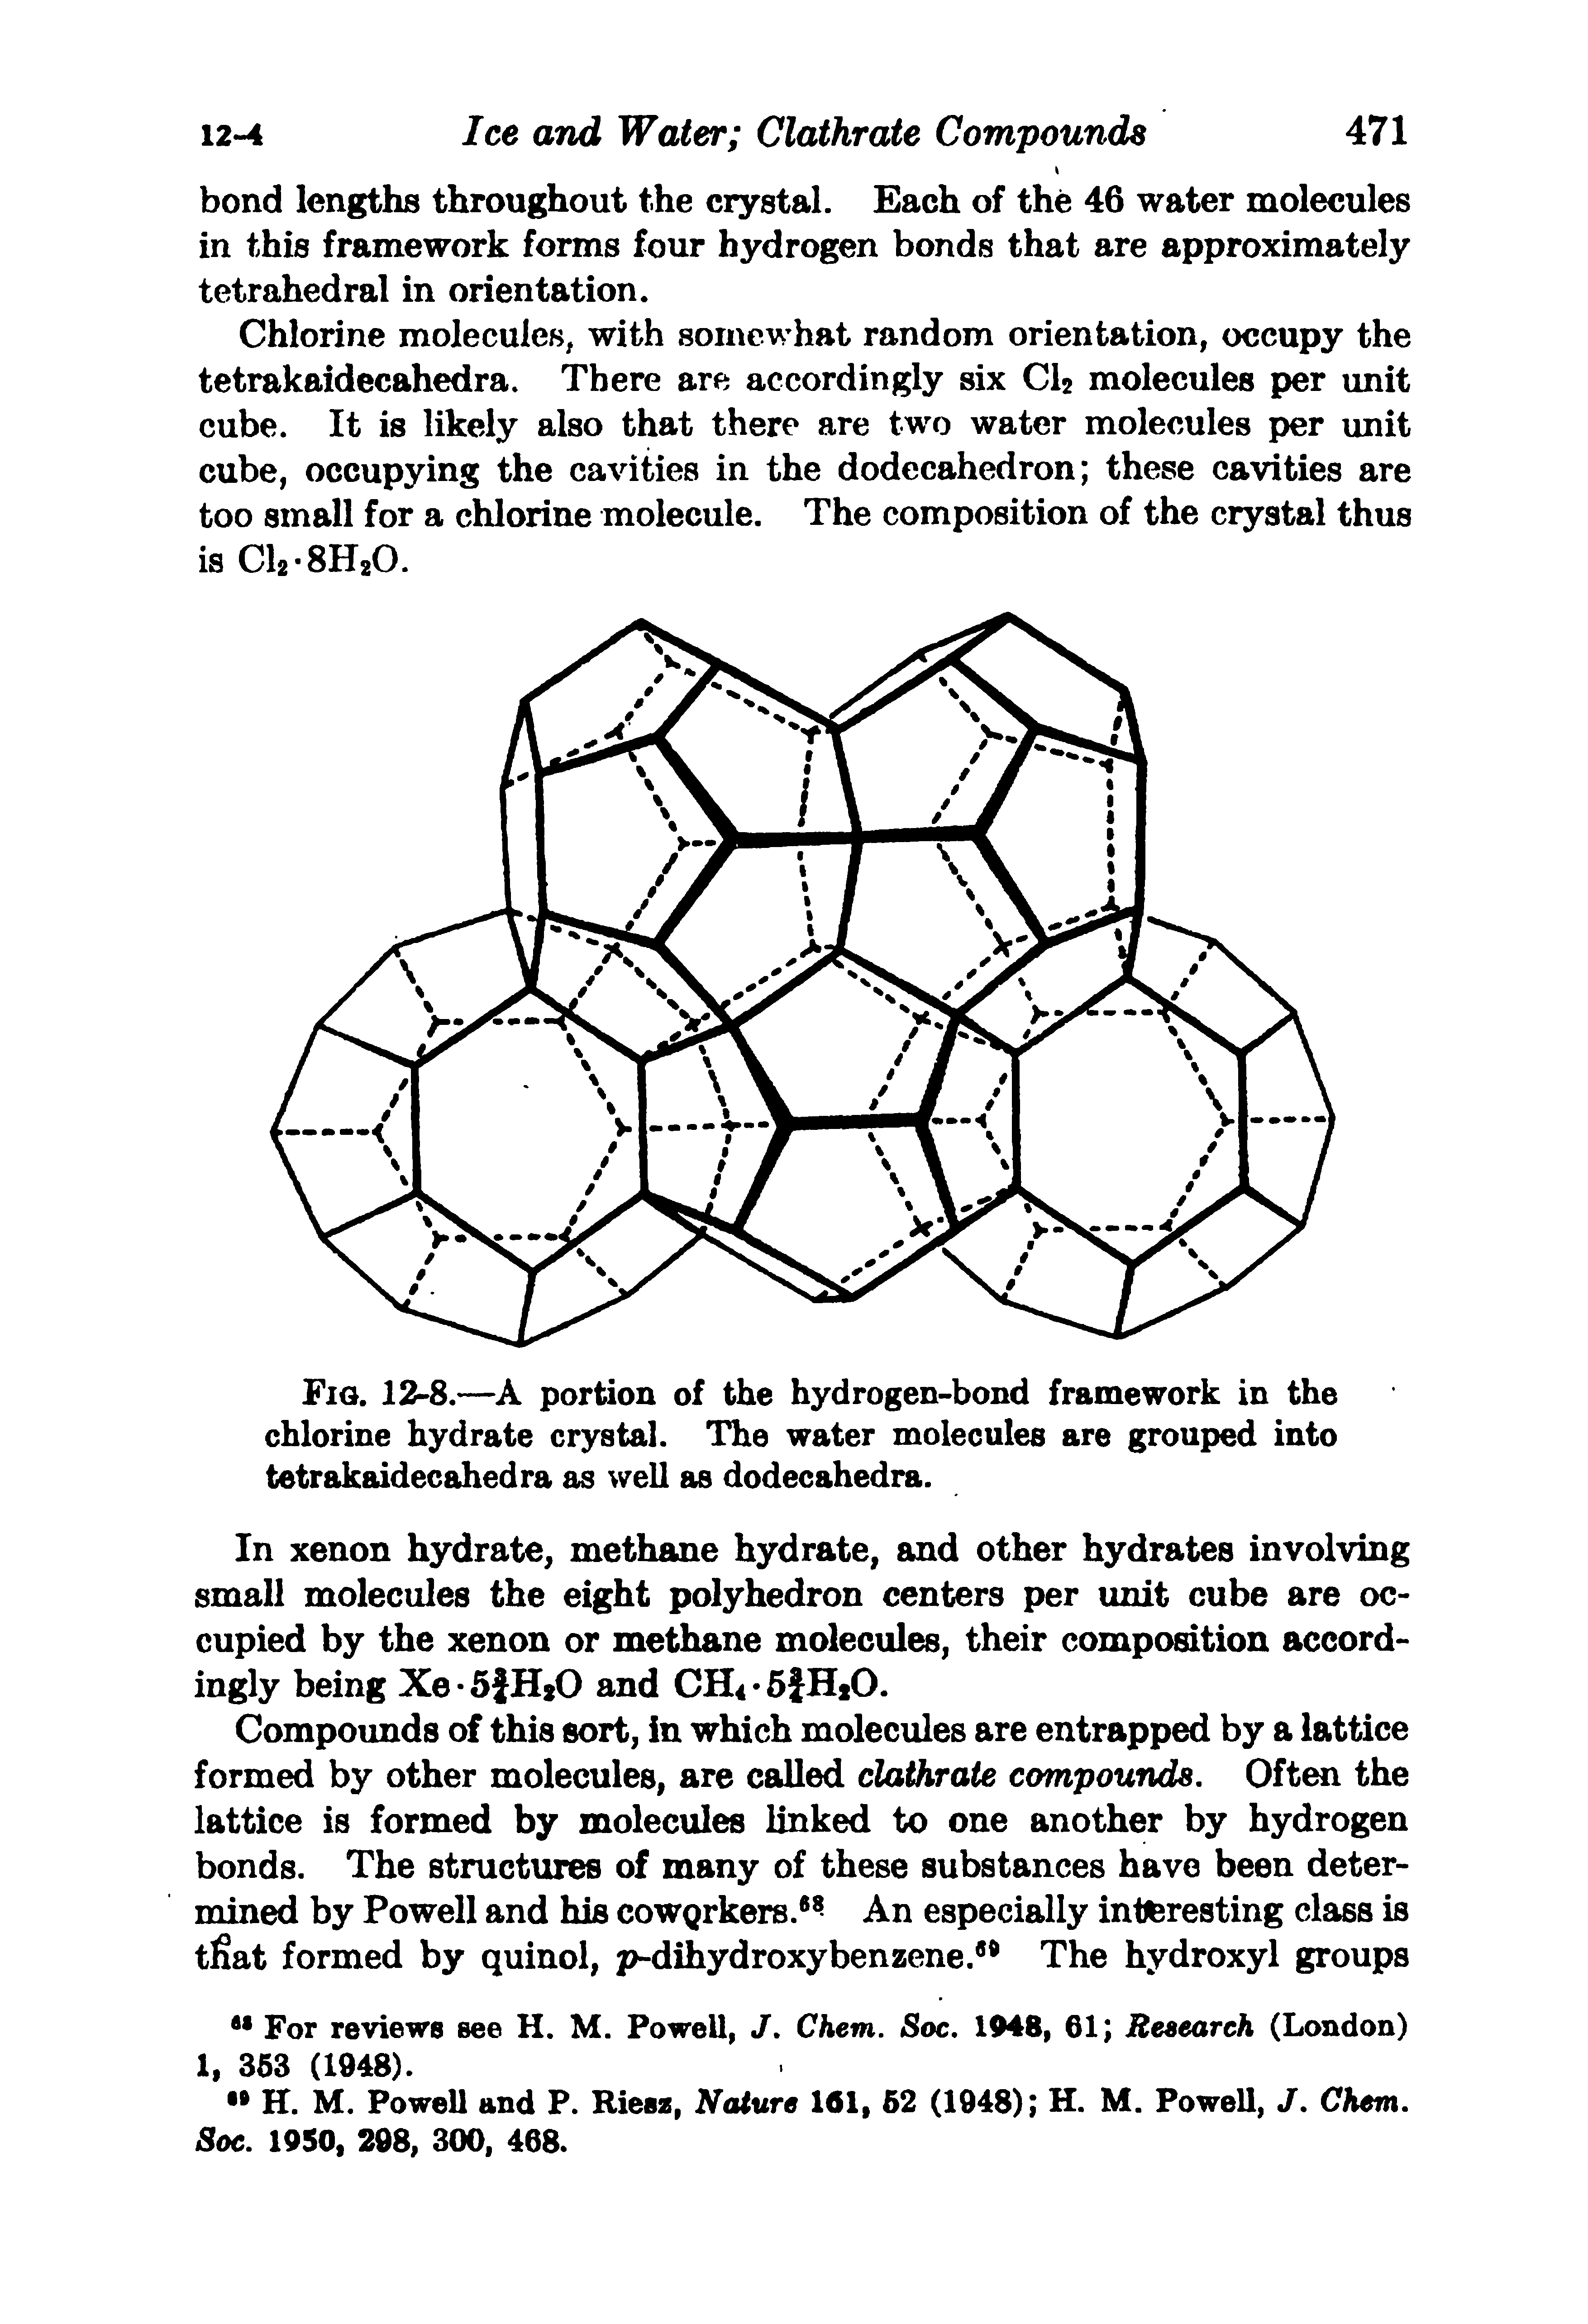 Fig. 12-8.—A portion of the hydrogen-bond framework in the chlorine hydrate crystal. The water molecules are grouped into tetrakaidecahedra as well as dodecahedra.